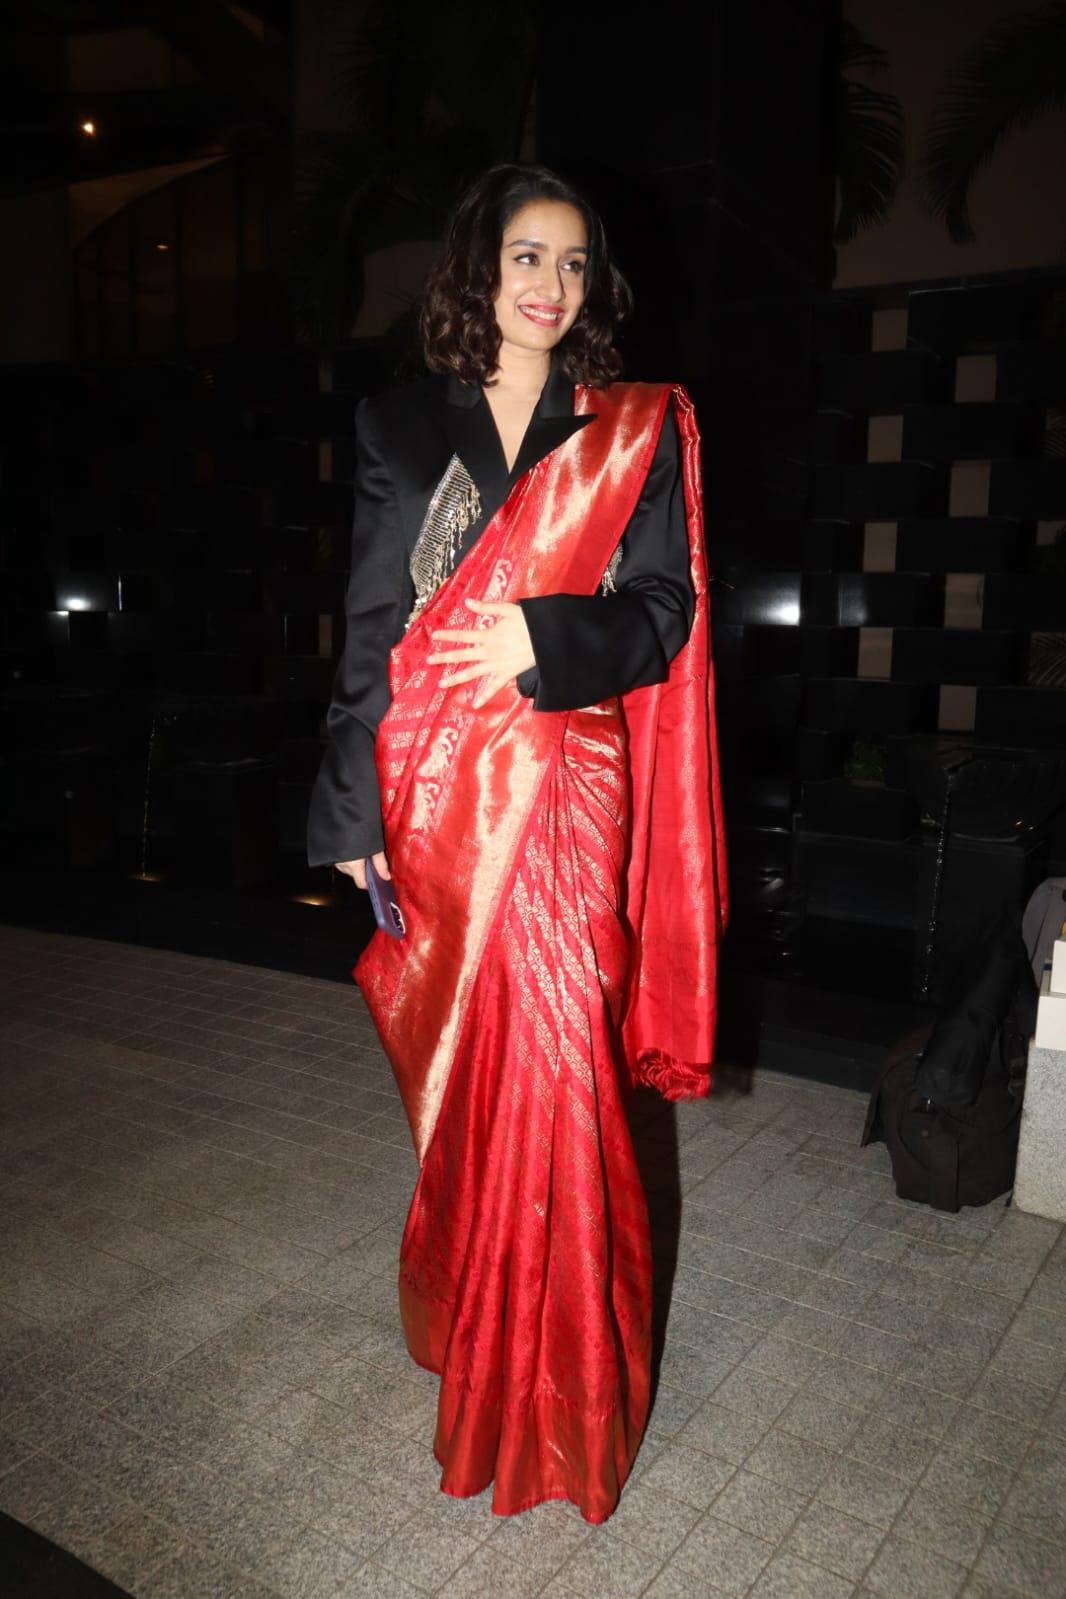 Shraddha Kapoor attended the opening of the Jio World Plaza in a red saree paired with a contrasting black blouse